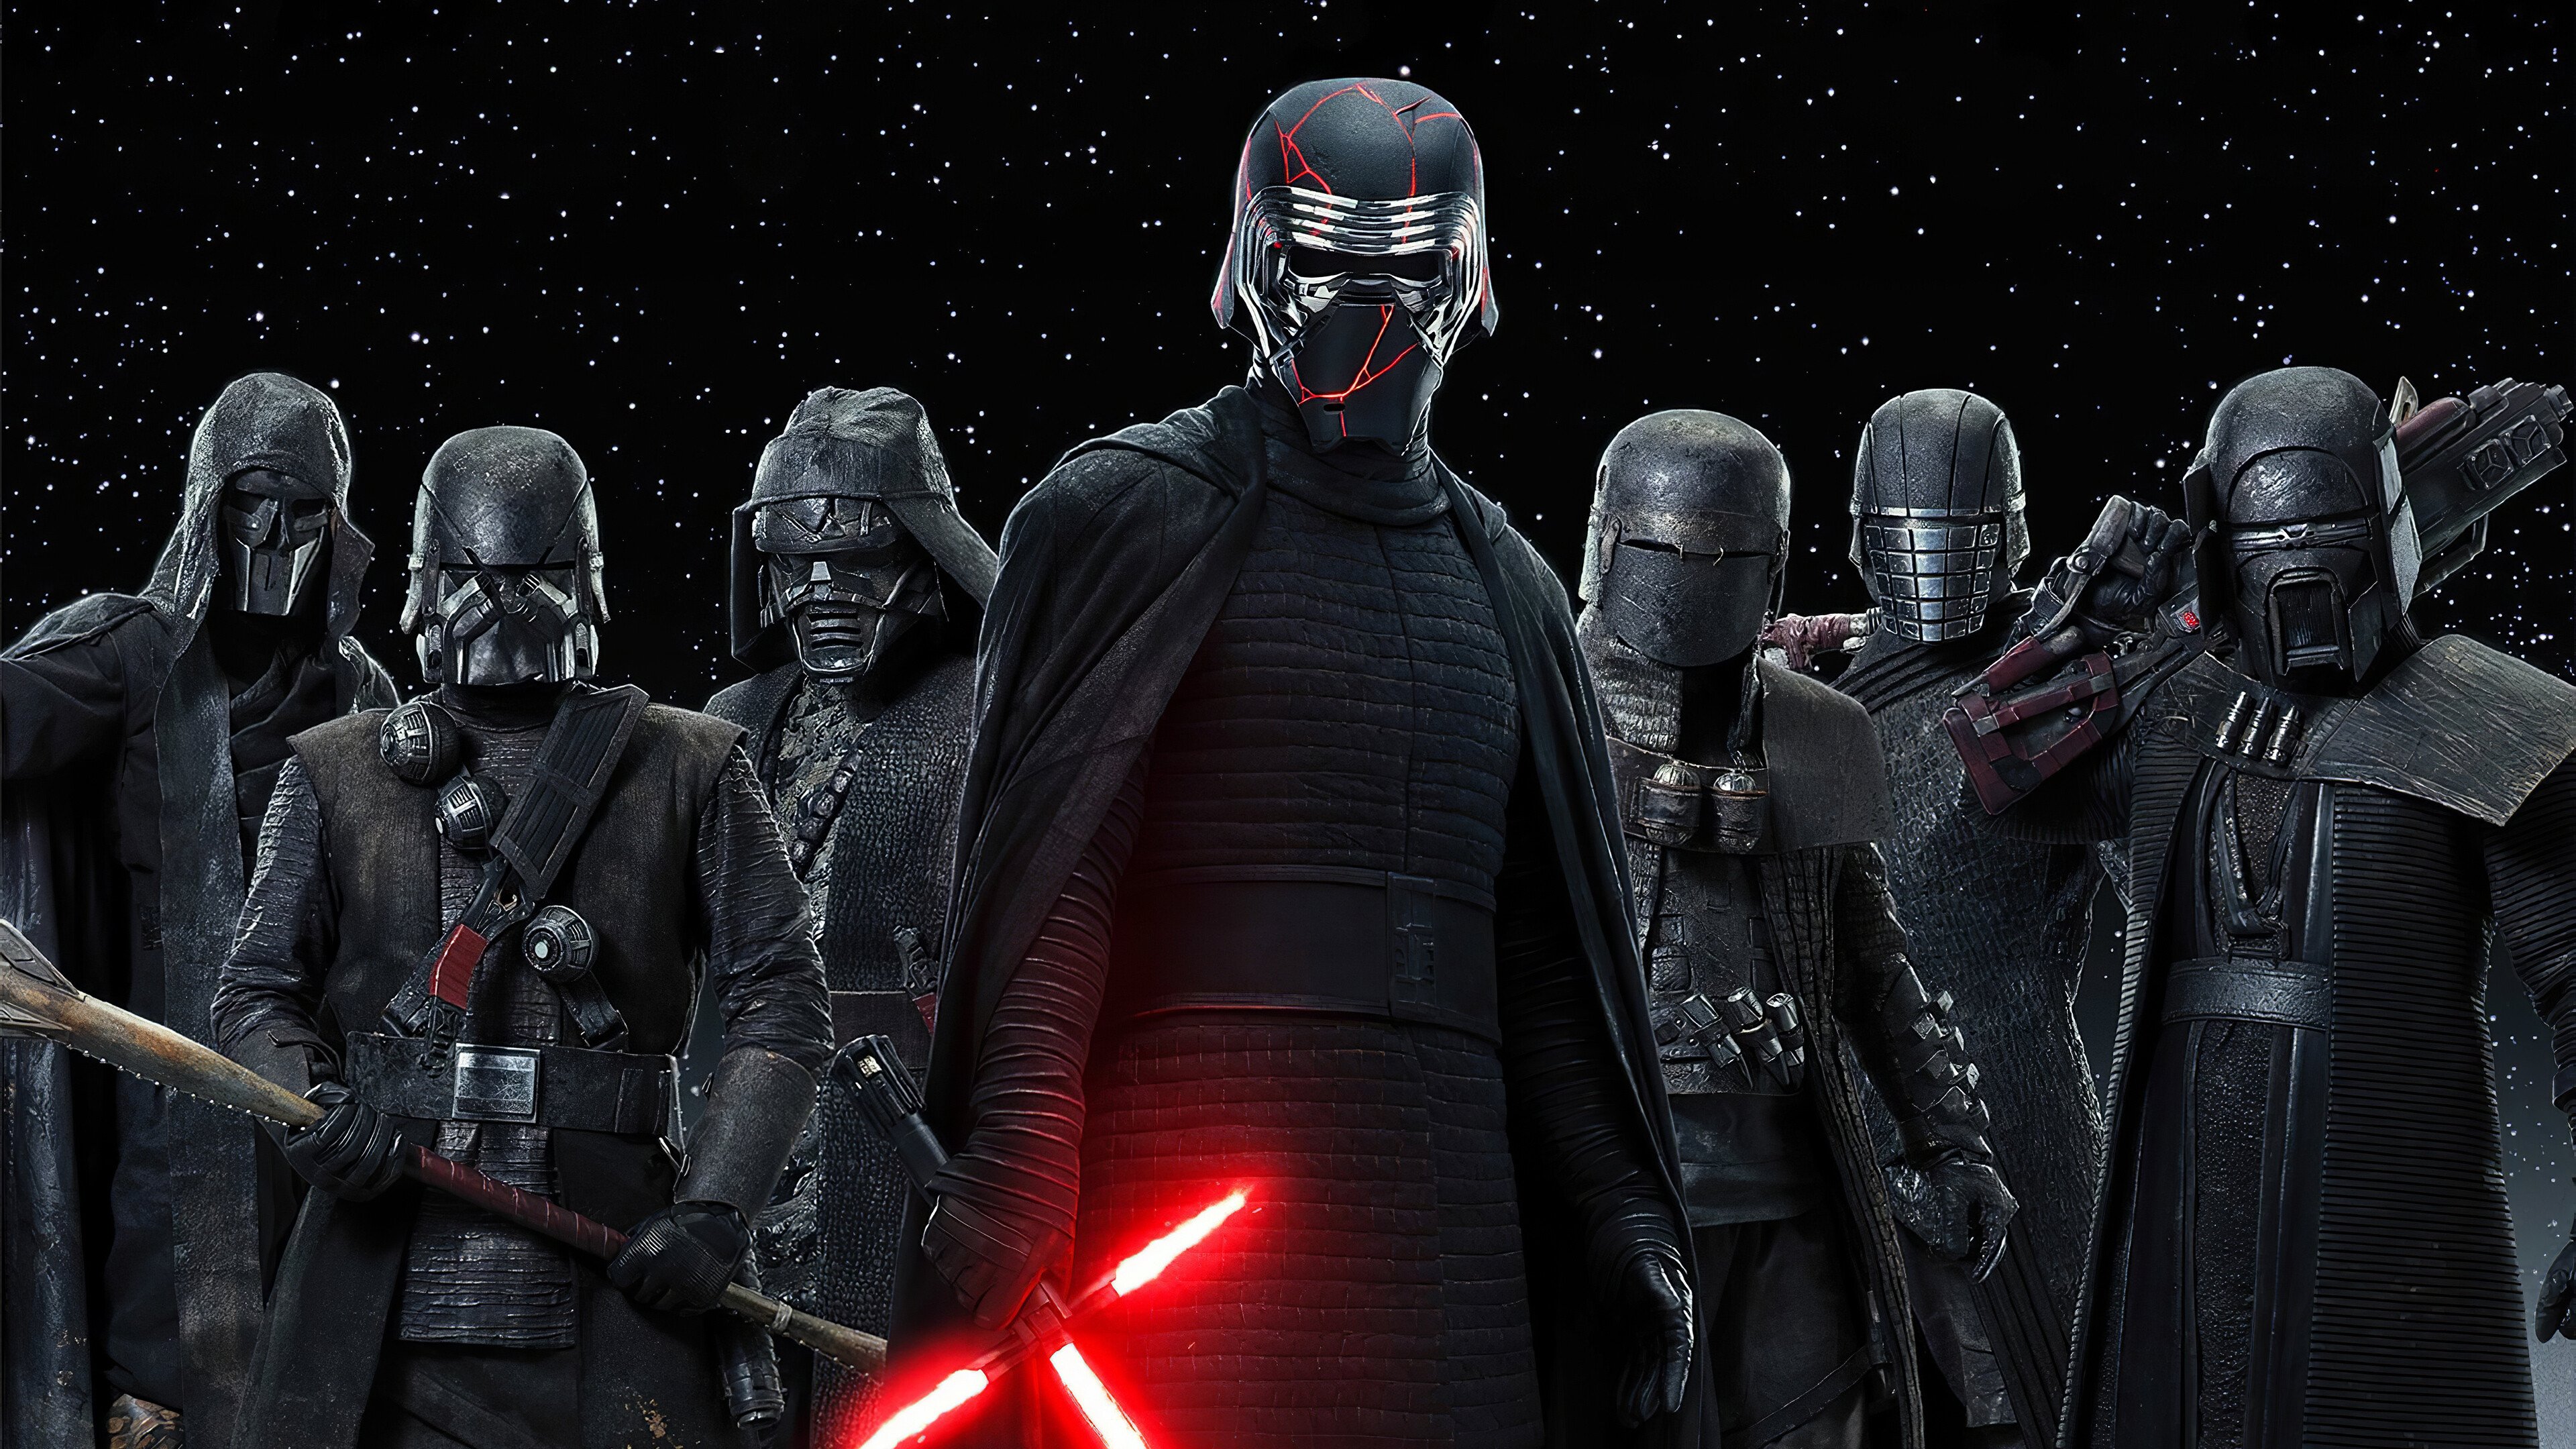 Wallpaper Knights of Ren from Star Wars The Rise of the Skywalker